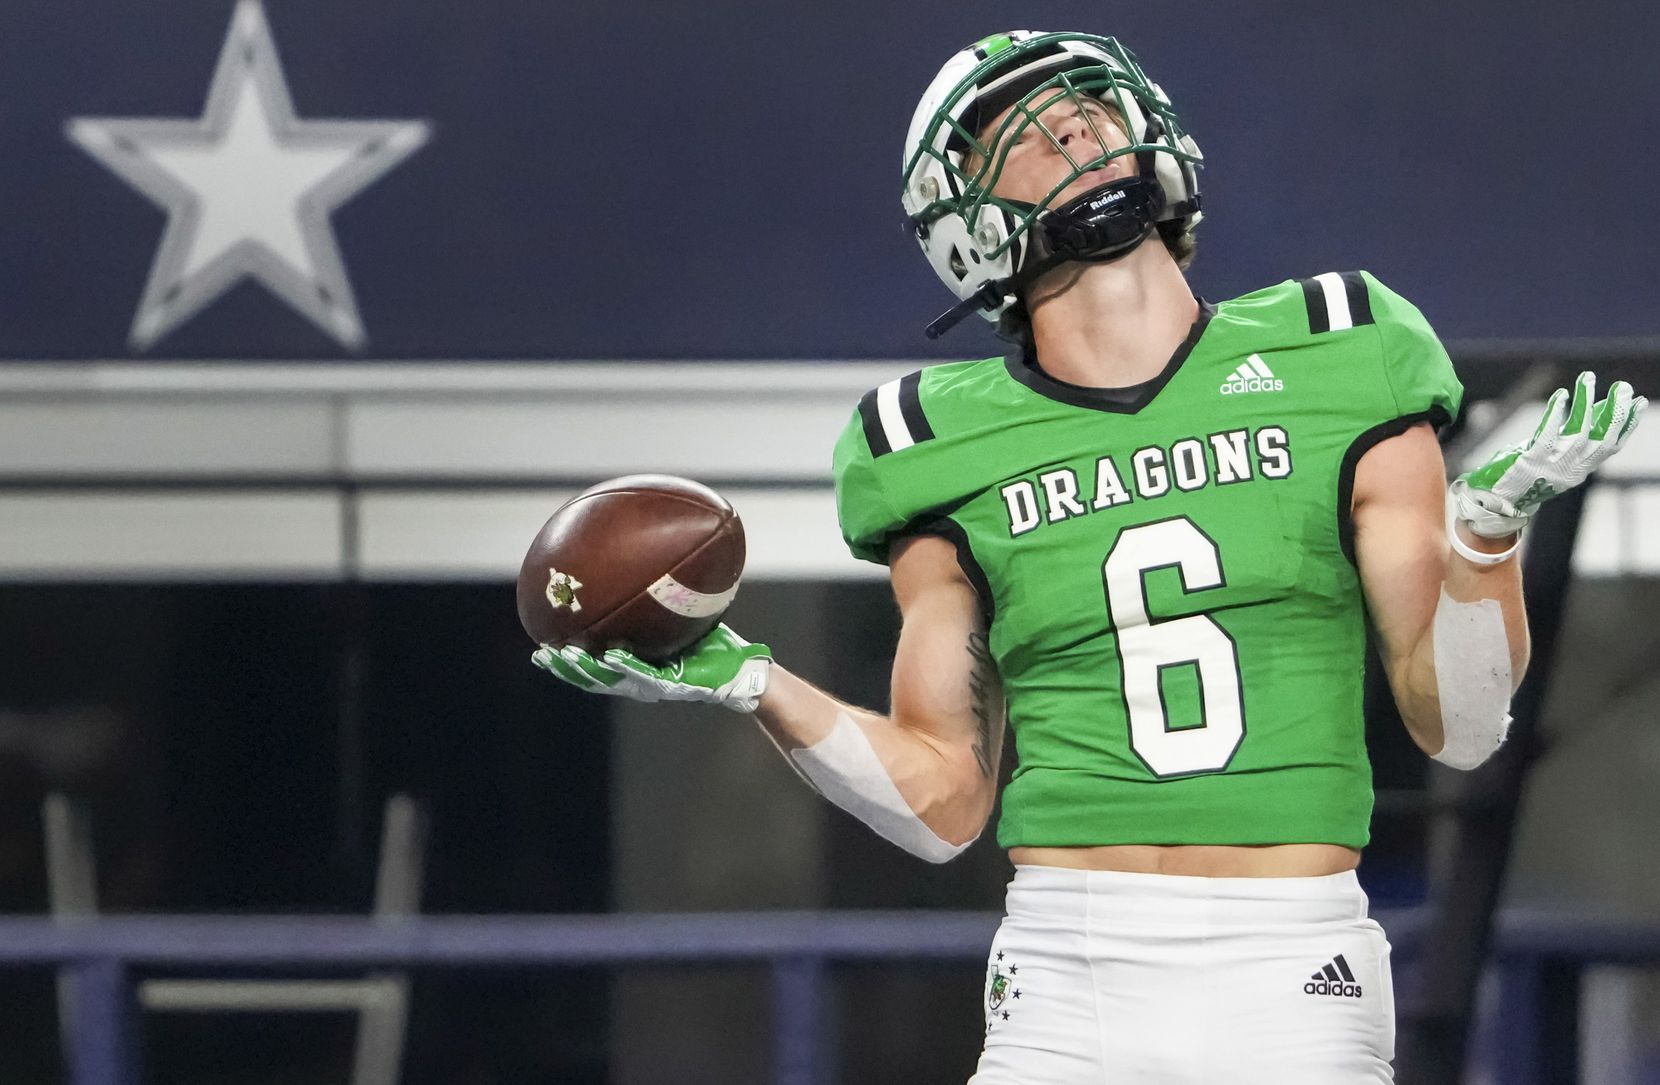 Southlake Carroll wide receiver Landon Samson (6) celebrates after scoring during a touchdown reception in the first half of a high school football game against Highland Park at AT&T Stadium on Thursday August 26, 2021 in Arlington.